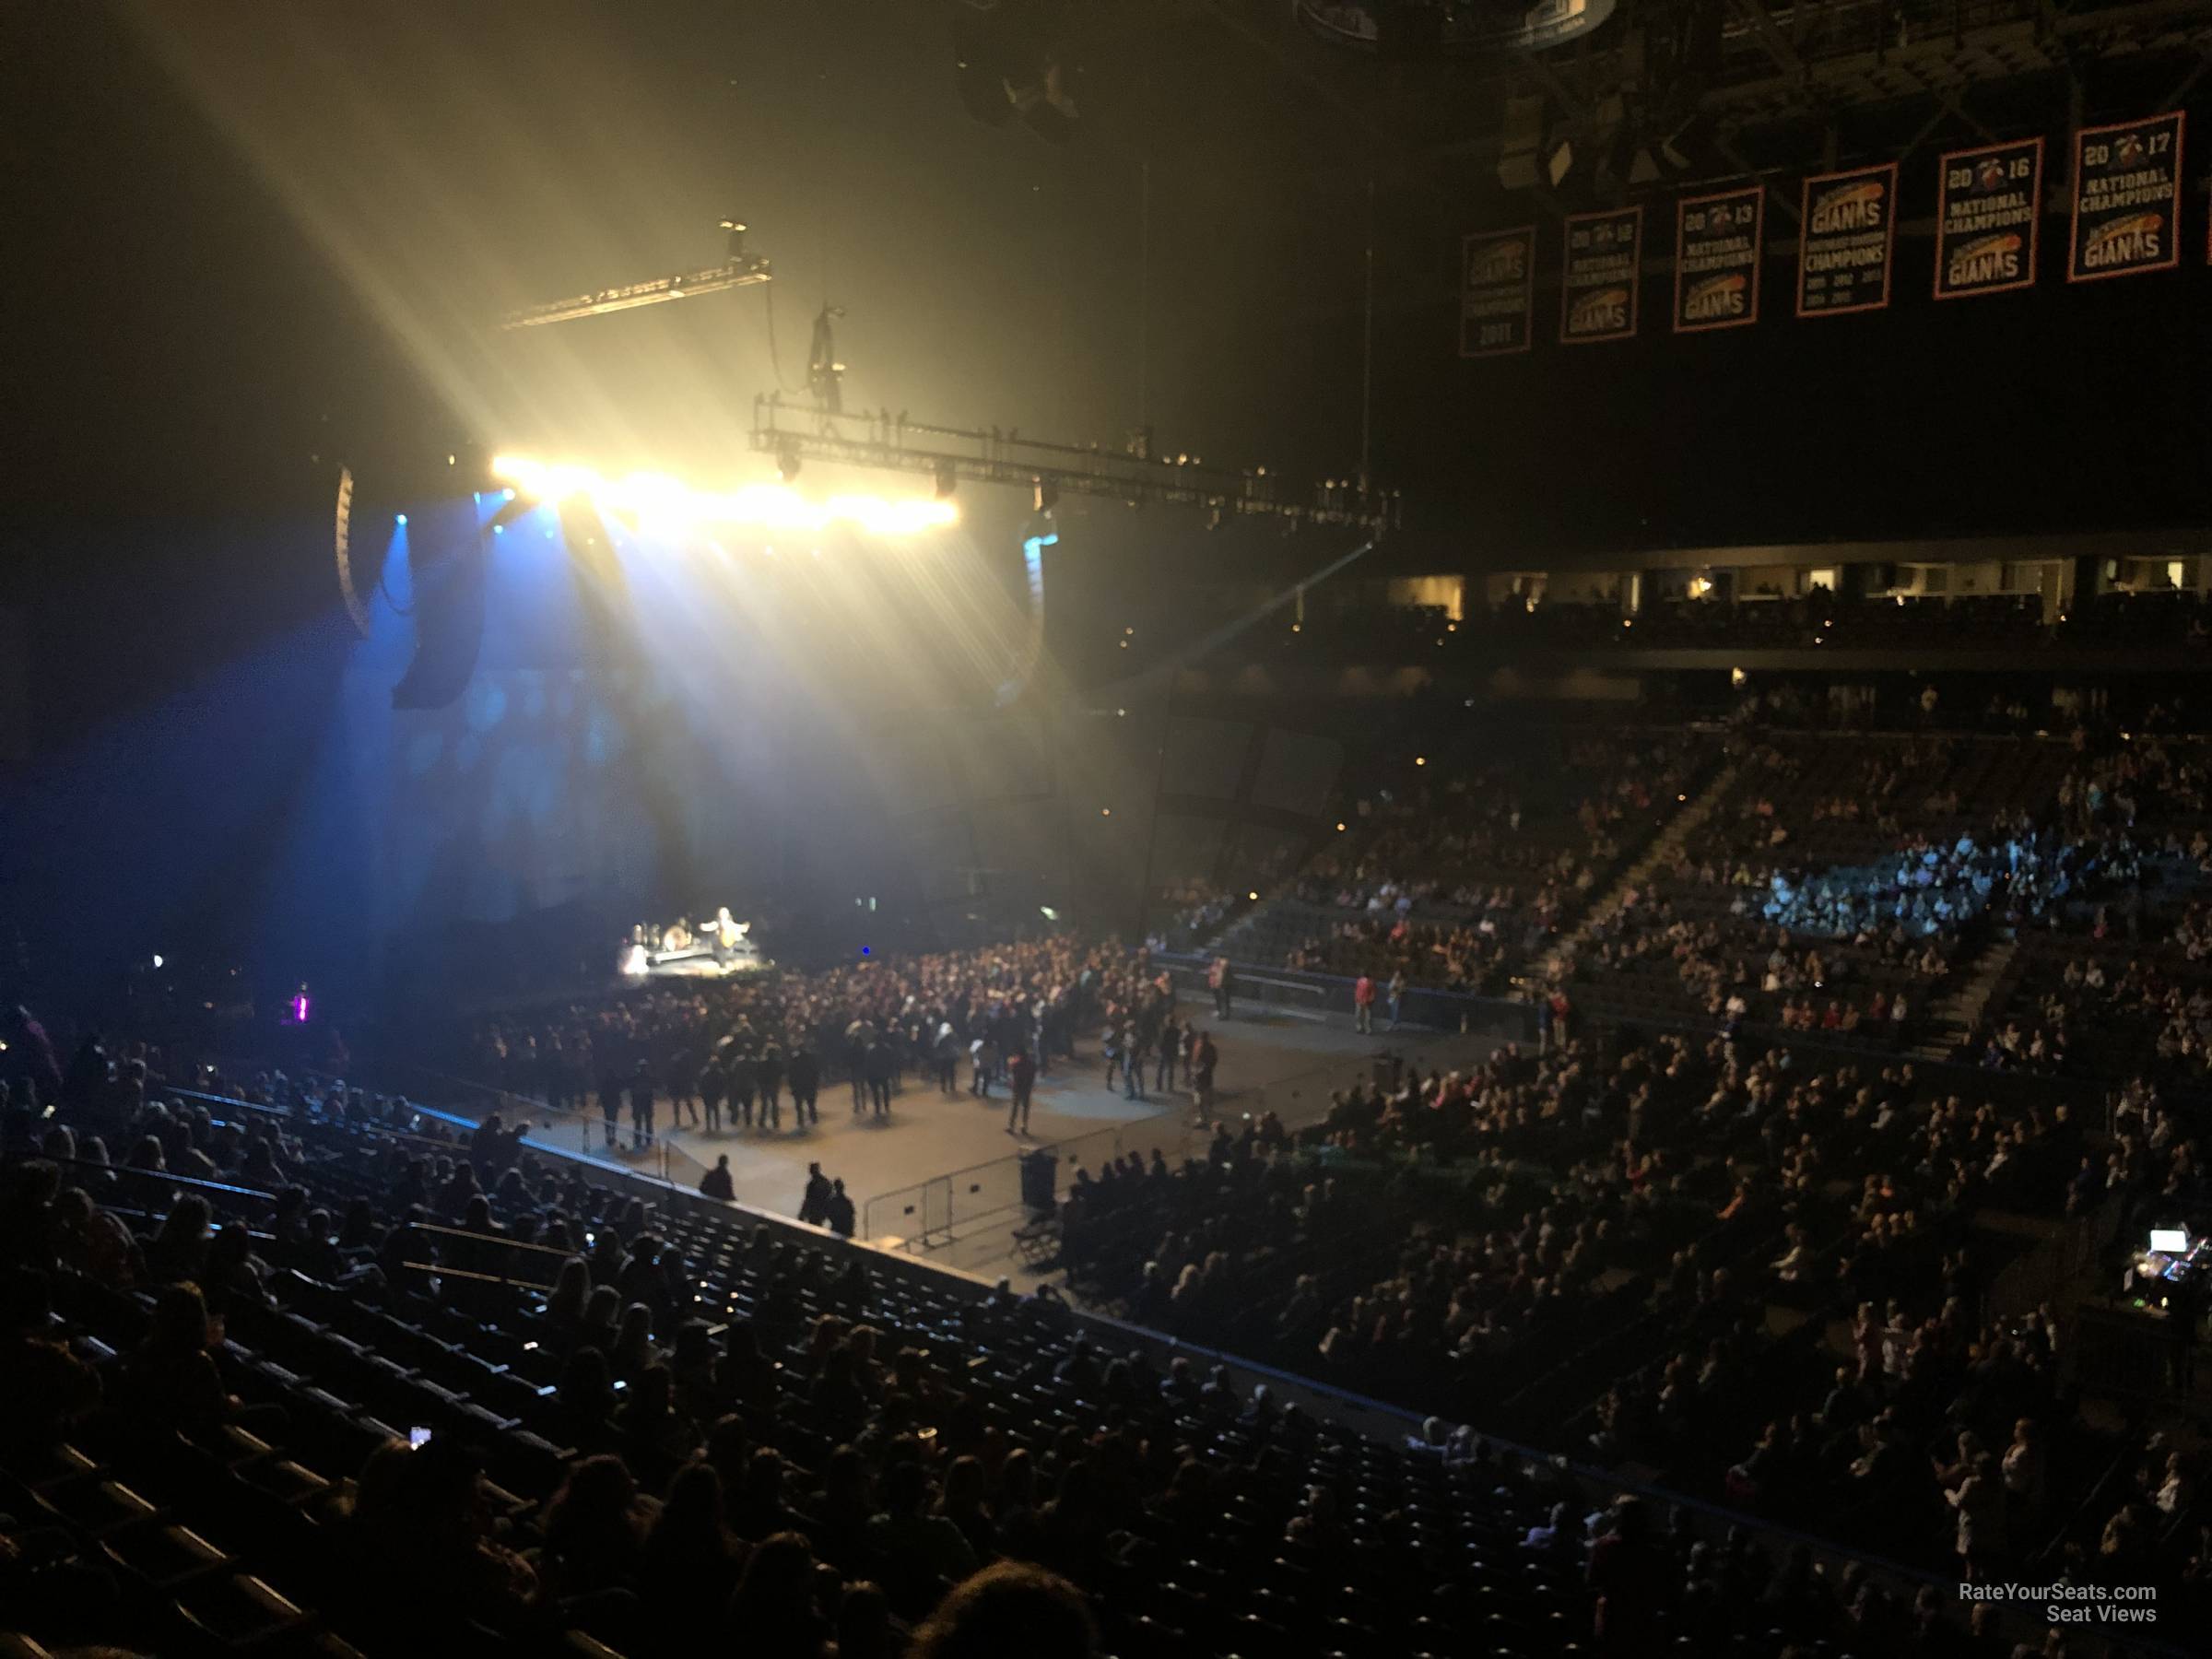 Section 112 at Vystar Veterans Memorial Arena for Concerts